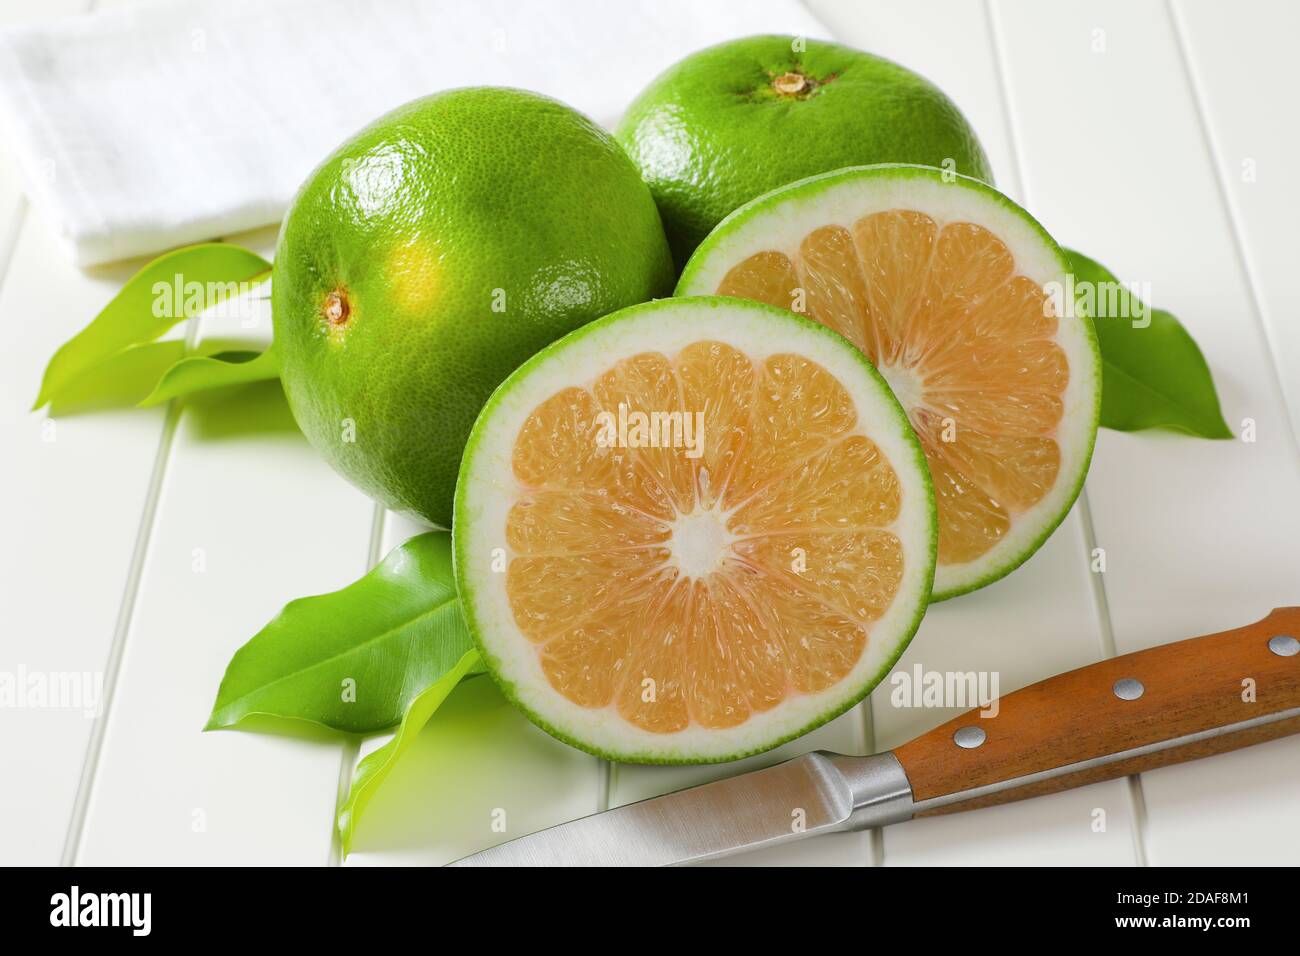 Sweetie fruits (green grapefruits, pomelits) - two whole fruits and slices Stock Photo